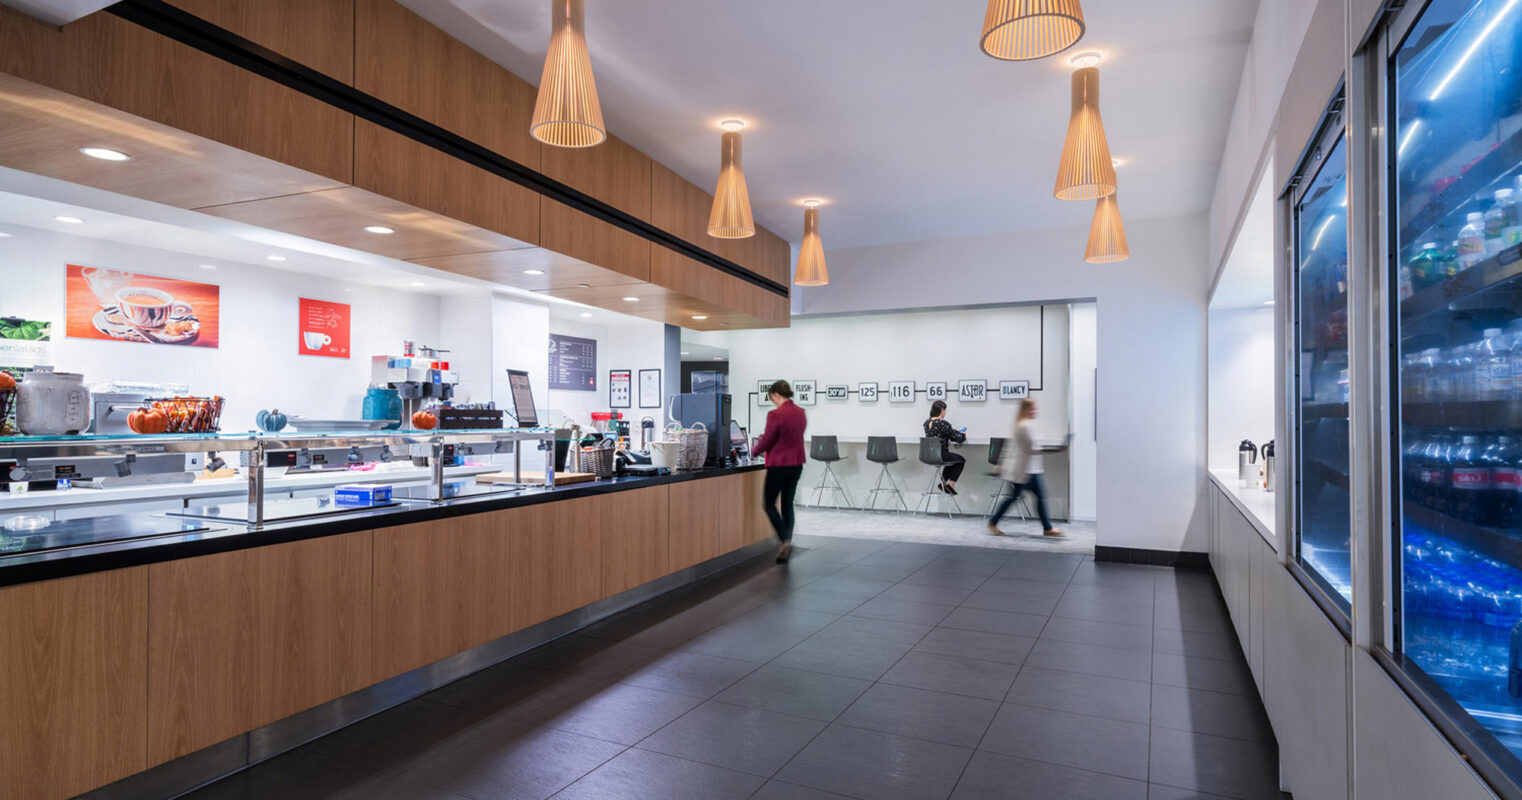 Modern cafeteria featuring a sleek white countertop, wooden accents, and stylish pendant lighting, with a beverage cooler on one side and seating area in the backdrop.